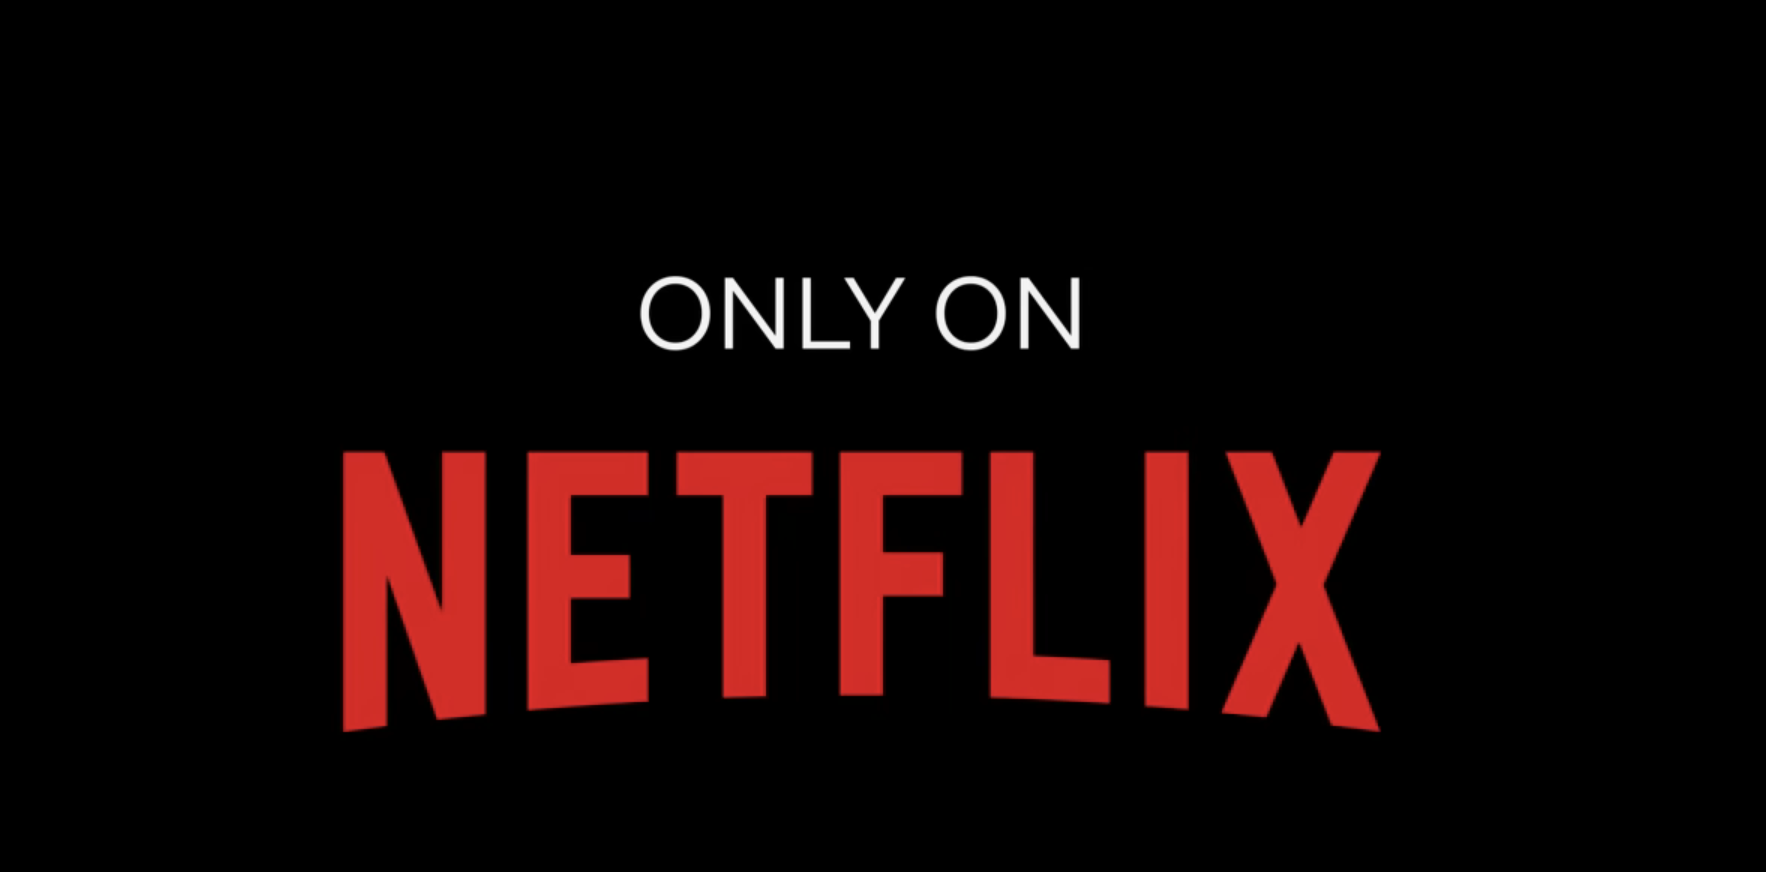 Text: &quot;Only on Netflix&quot; written in white and red letters on a black background